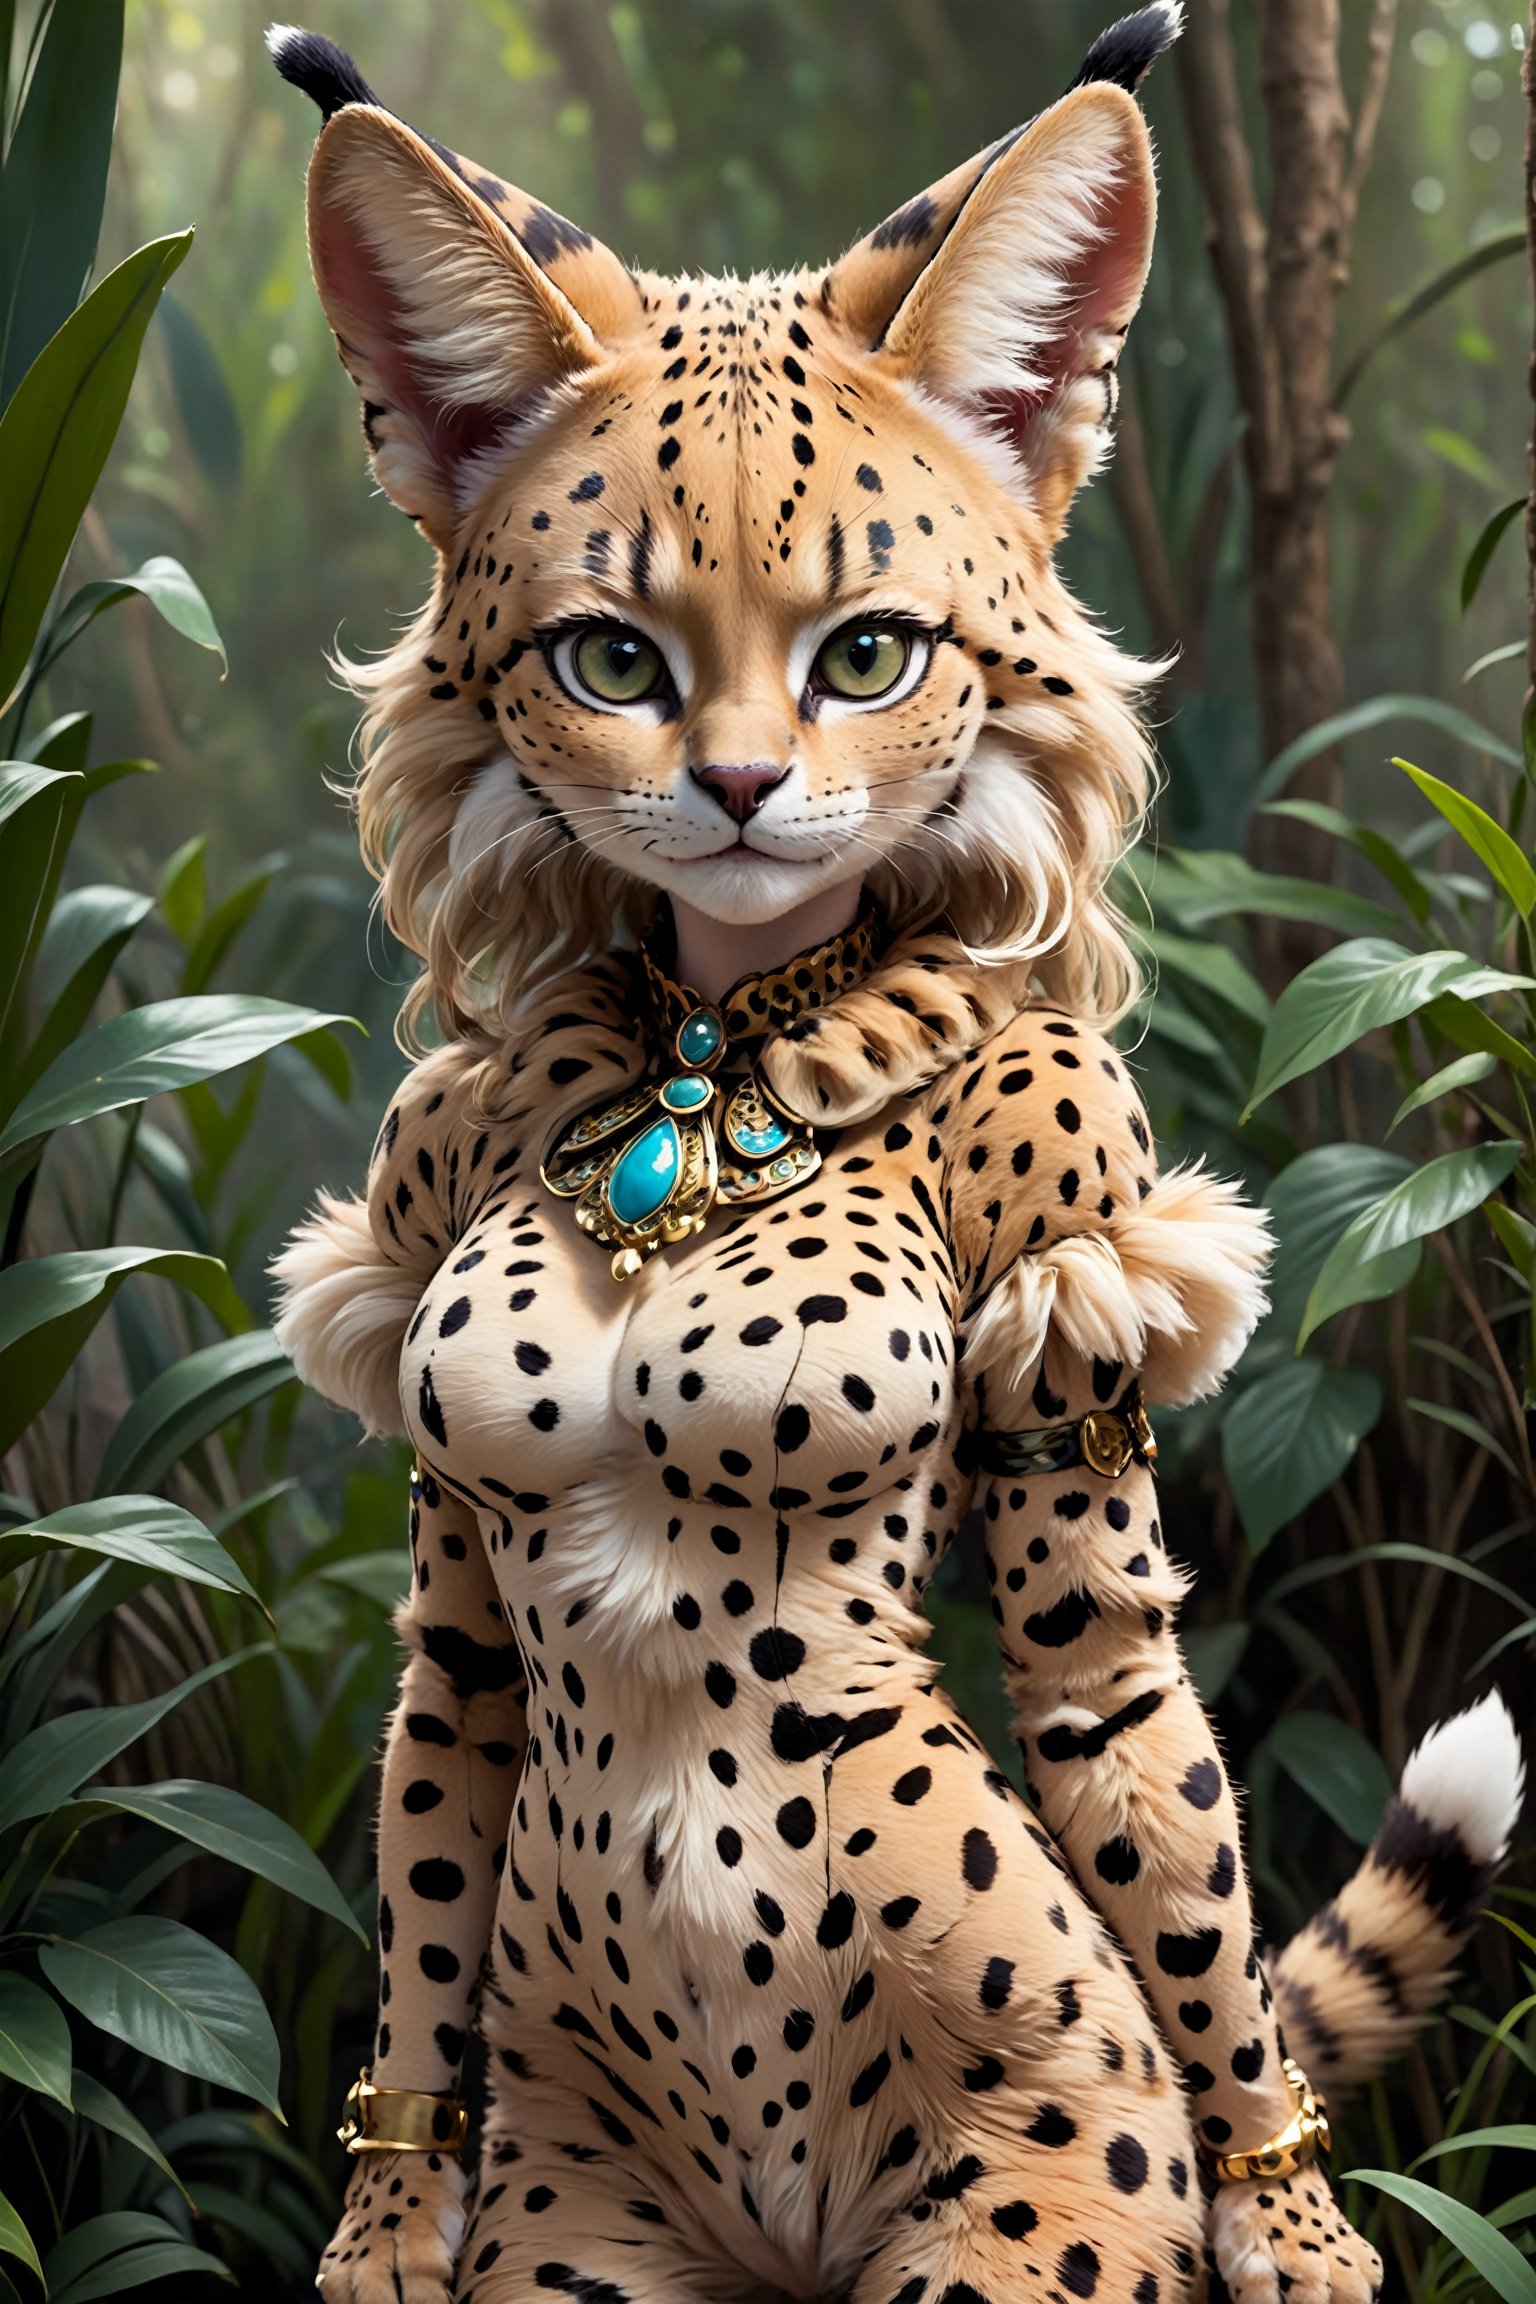  personified serval cat girl, embodying the grace, curiosity, and independence of her feline counterpart. With soft, spotted fur and expressive eyes, she captivates with her playful charm and alertness. Adorned in a whimsical ensemble inspired by the African savannah, she exudes a blend of wild beauty and human-like personality,catgirl